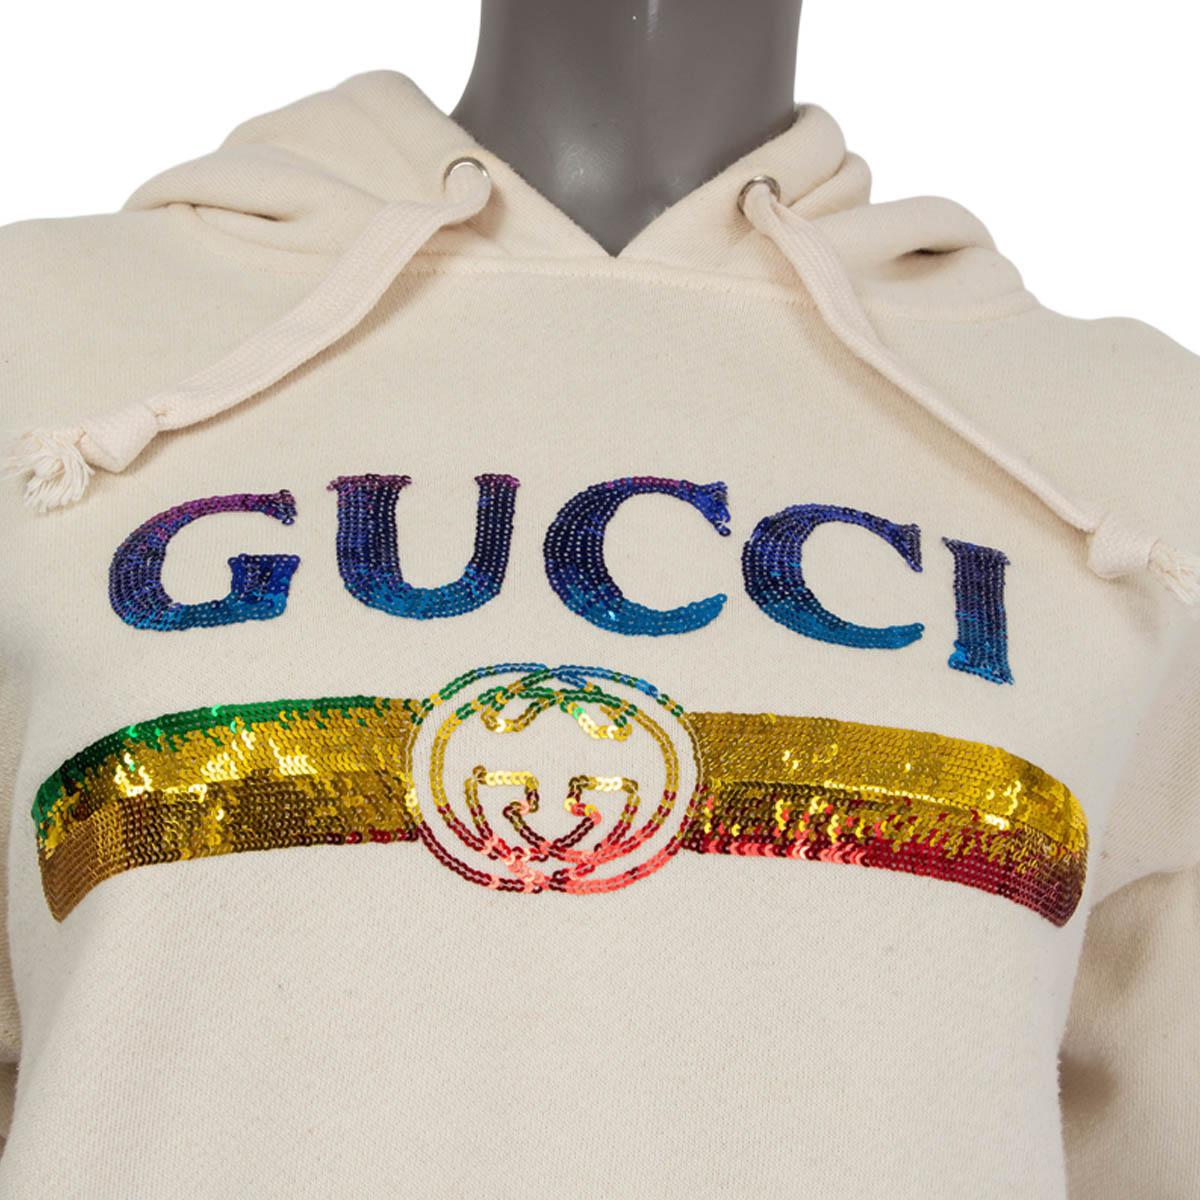 GUCCI ivory cotton SEQUIN EMBELLISHED Hoodie Sweatshirt Sweater S In Good Condition For Sale In Zürich, CH